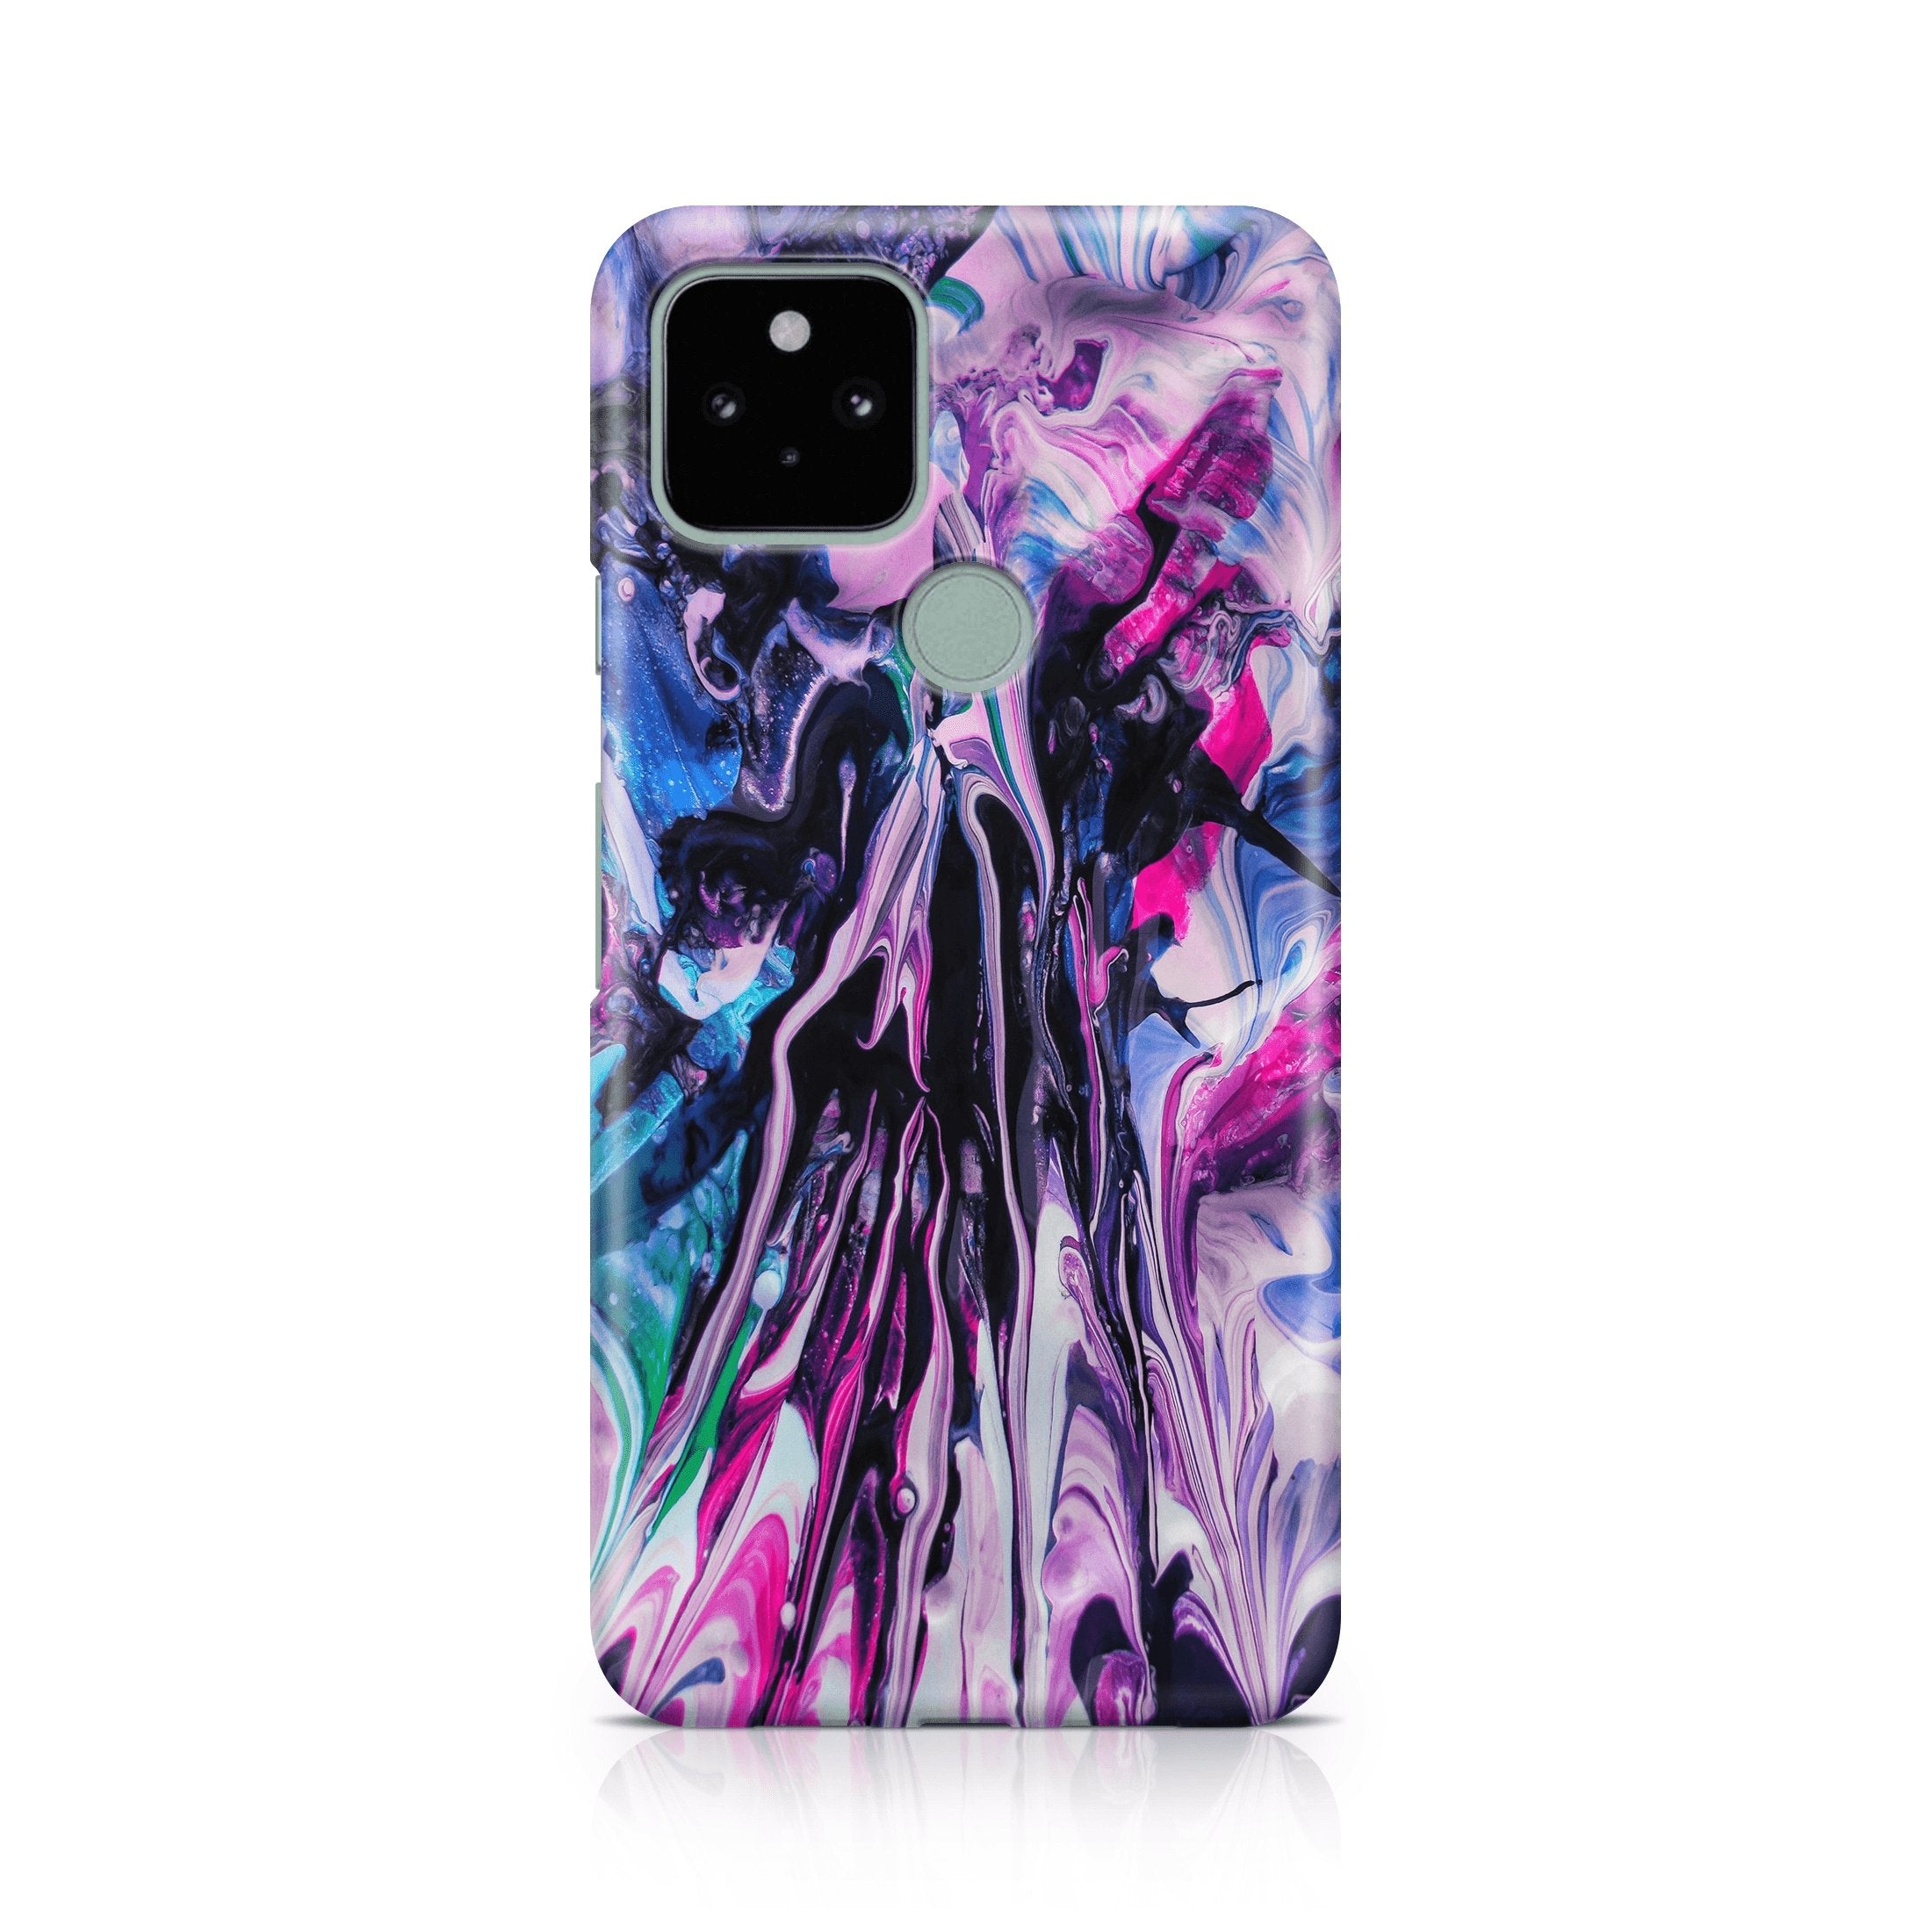 Fluid Acrylic Chaos - Google phone case designs by CaseSwagger